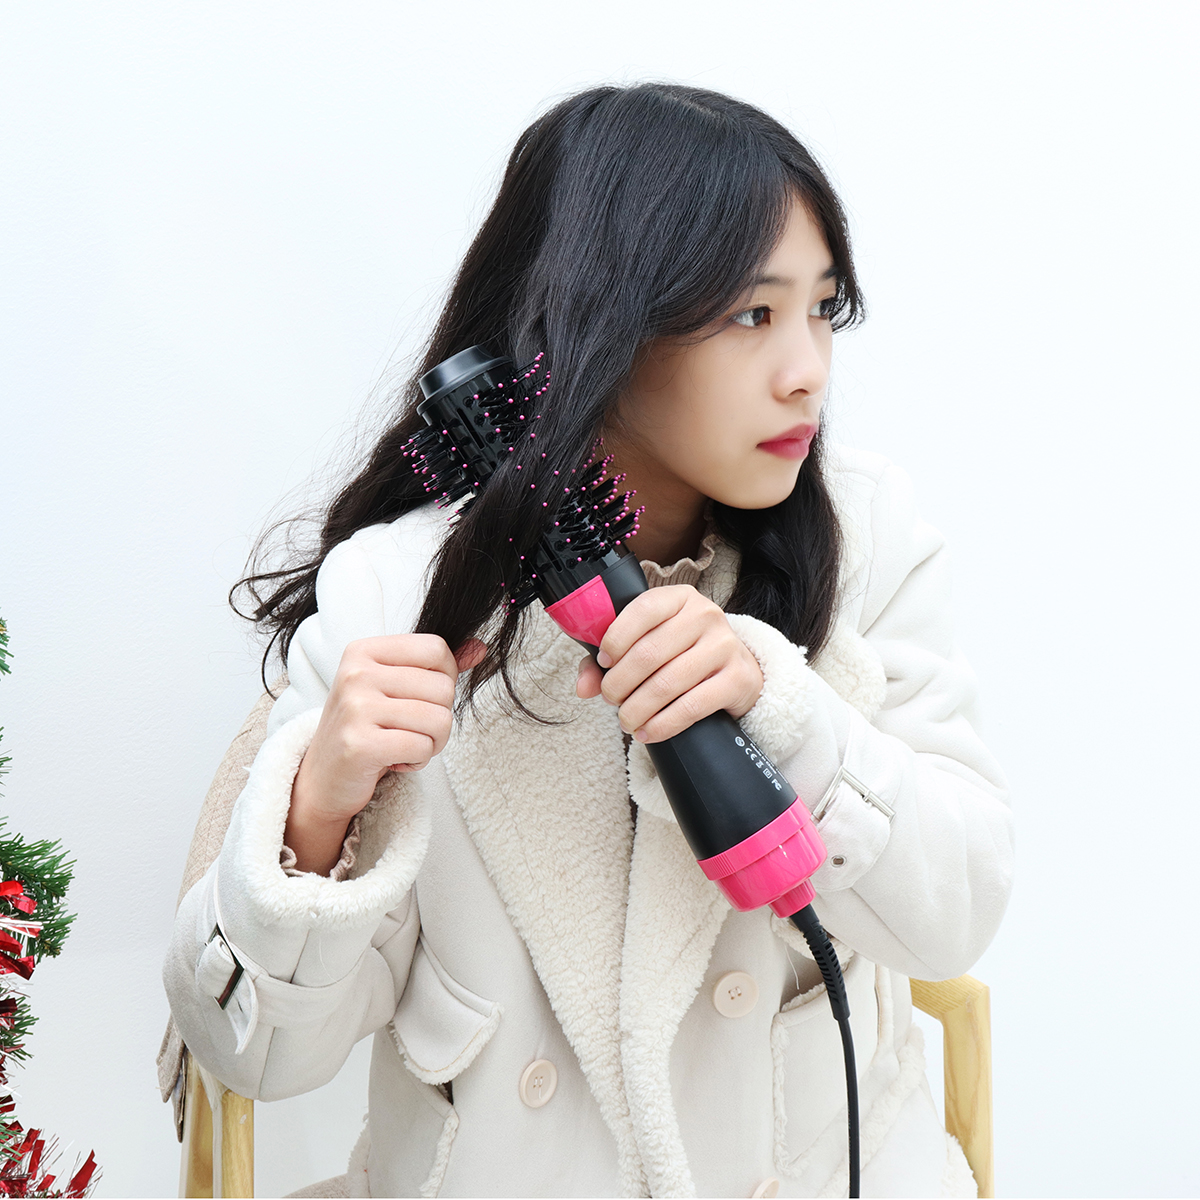 3-in-1-Negative-Ion-Straightening-Hair-Dryer-Brush-One-Step-for-Salon-and-Curly-Hair-Comb-Reduce-Fri-1431344